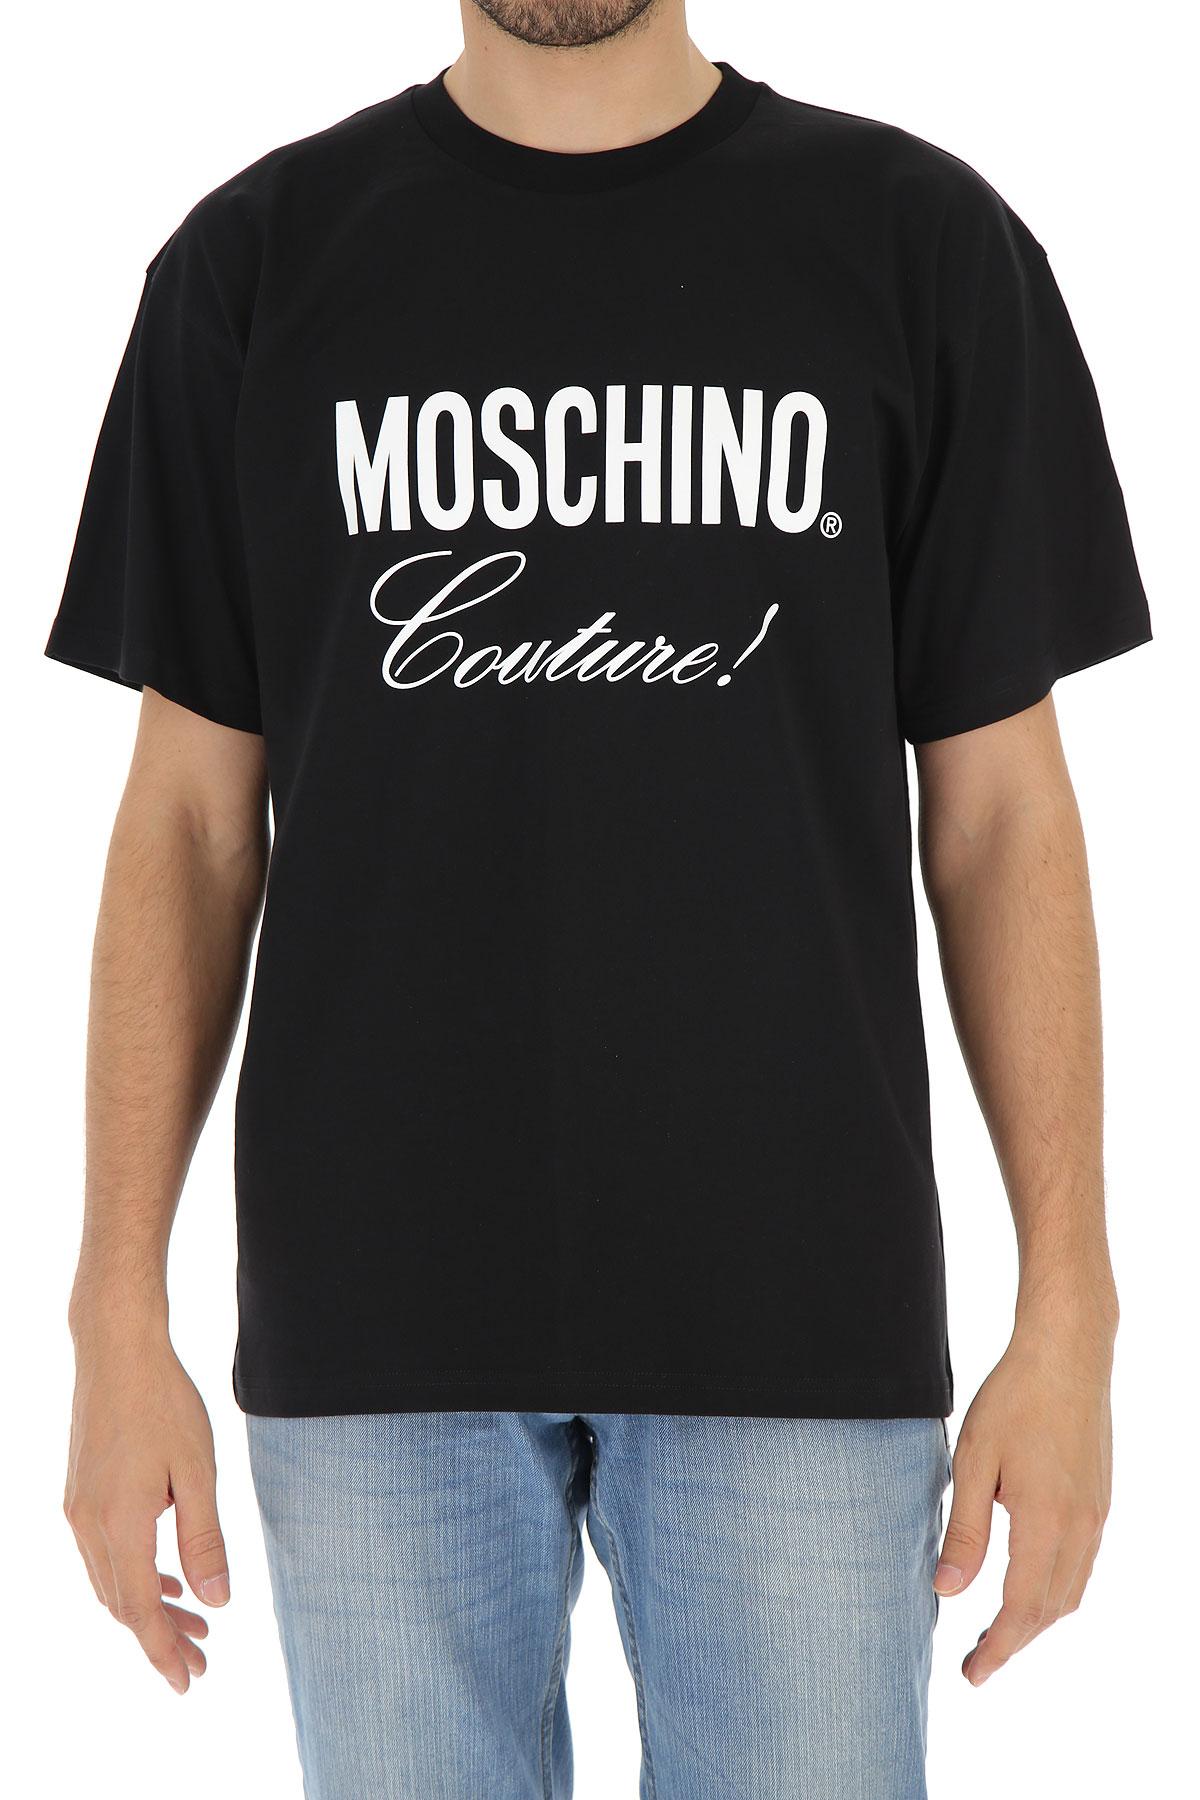 Moschino Clothing For Men in Black for Men - Lyst